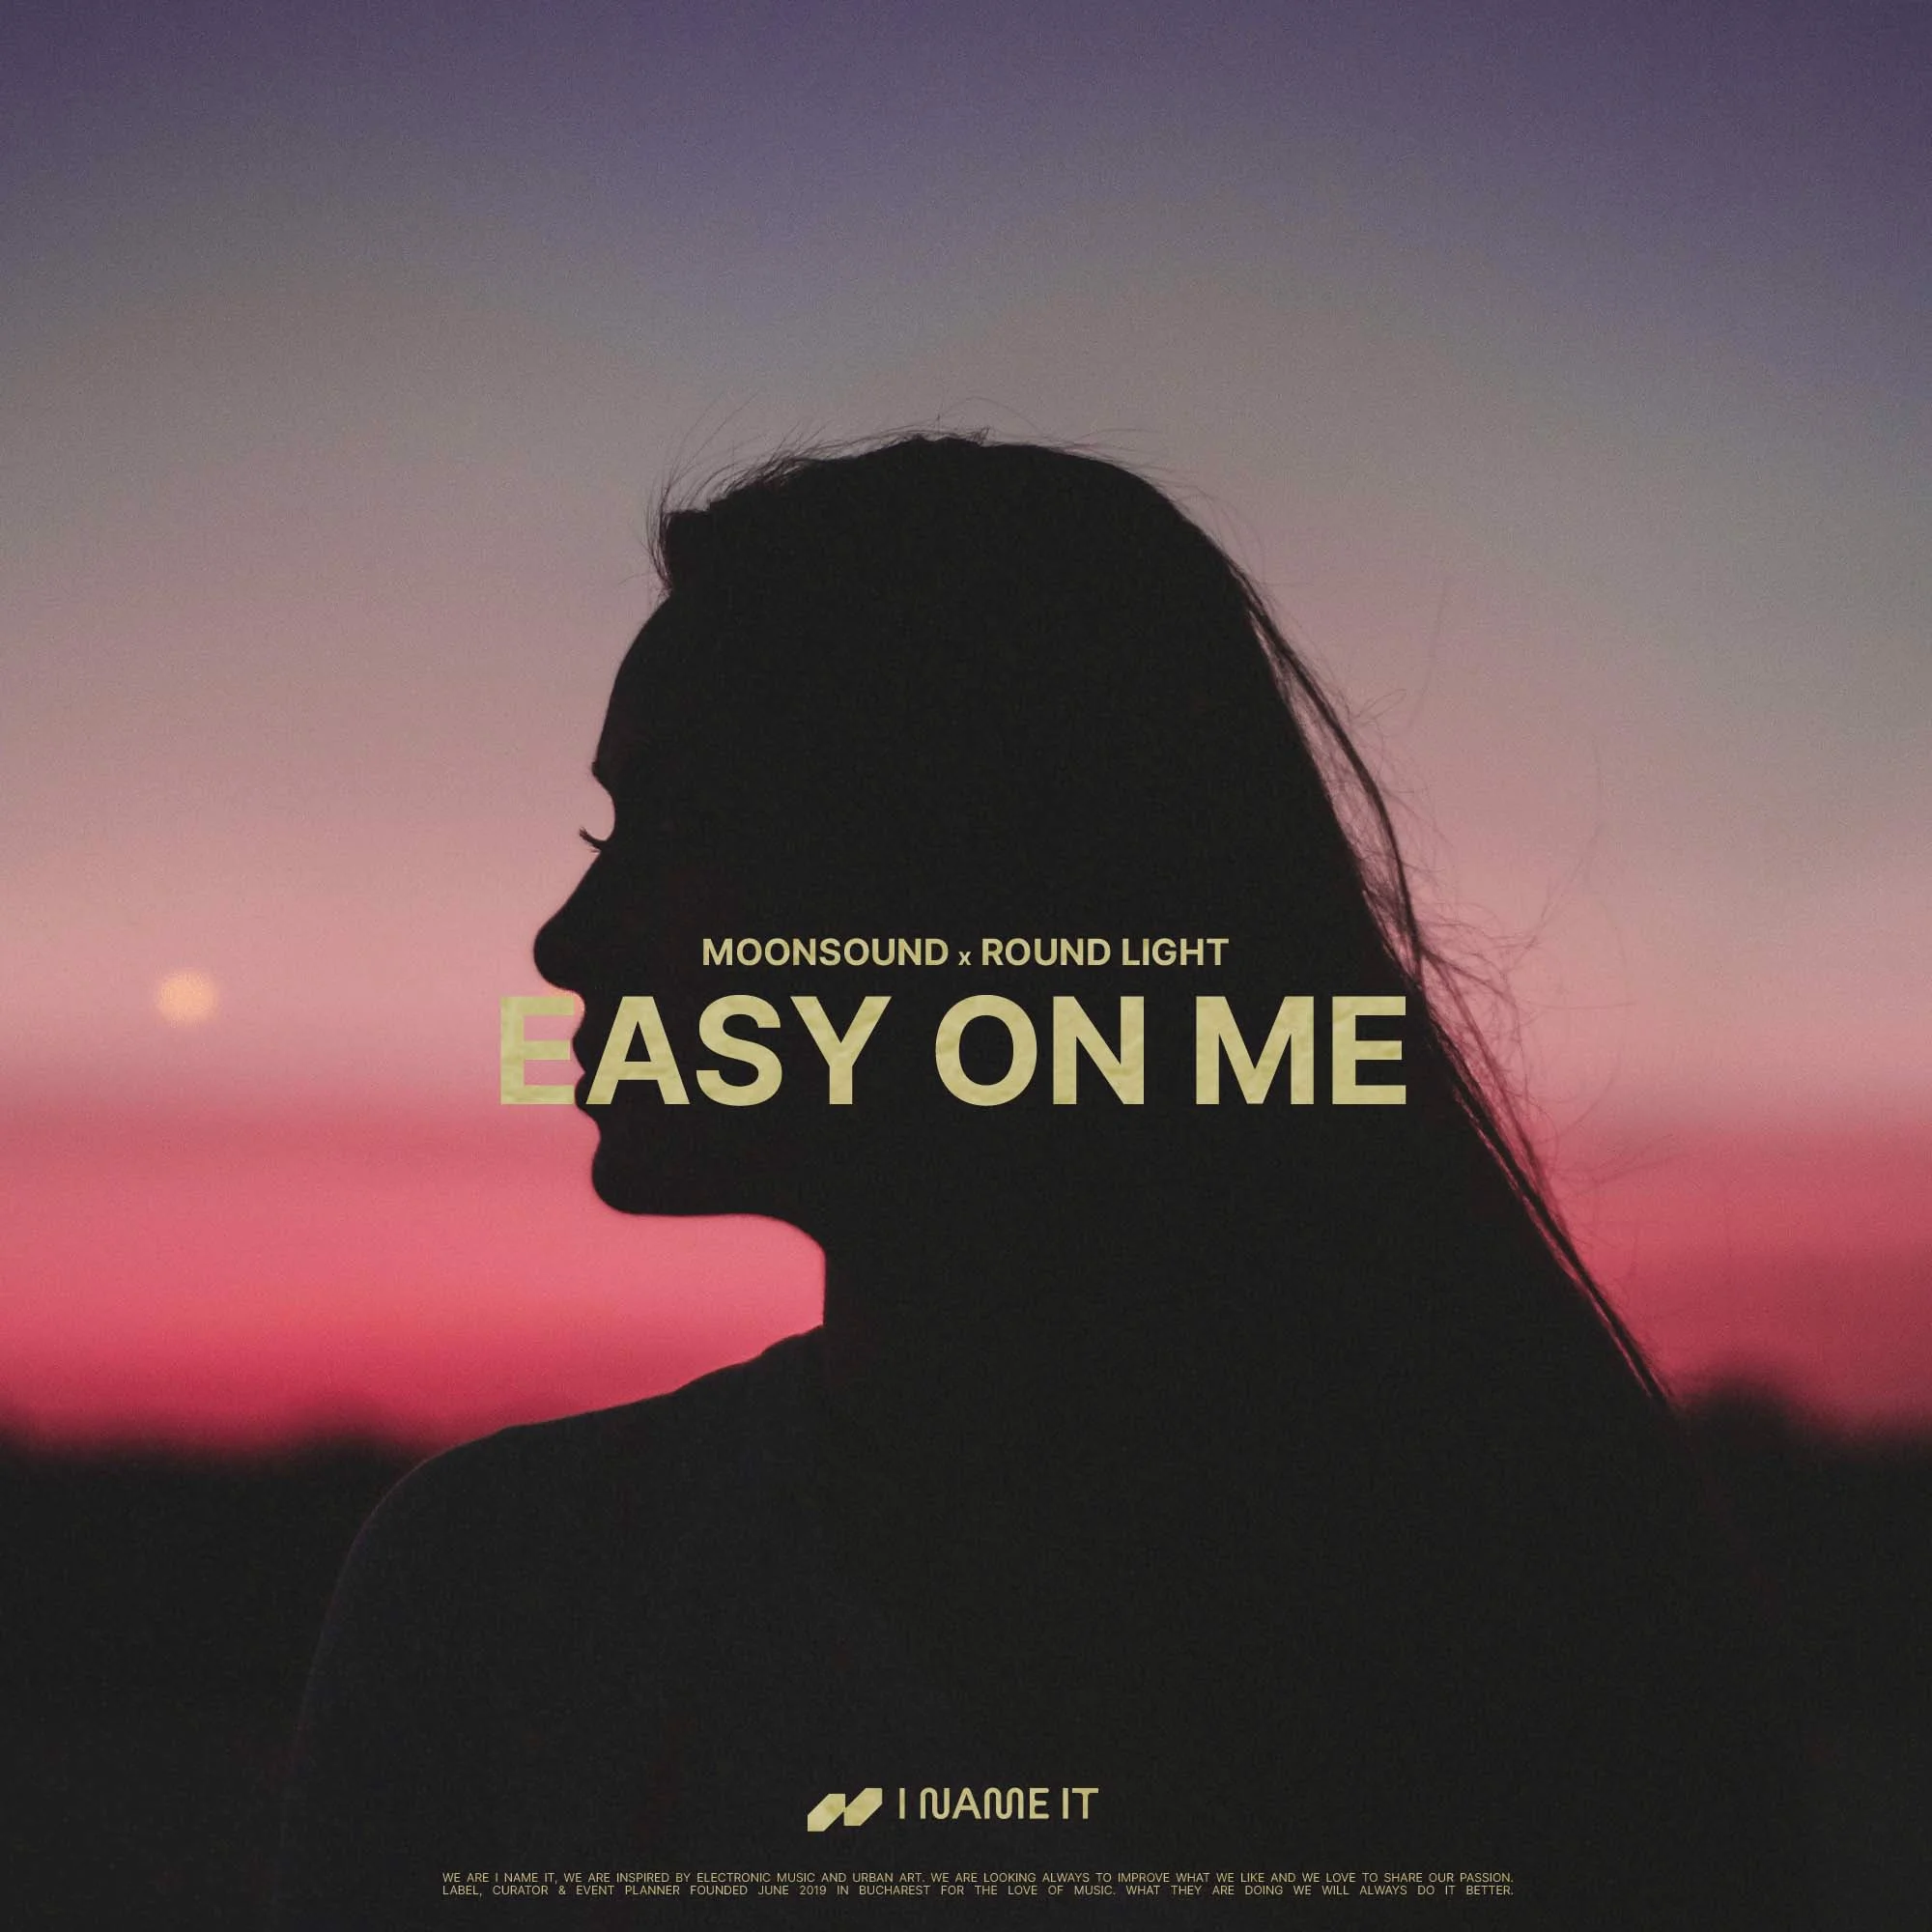 MoonSound x RoundLight – Easy on me